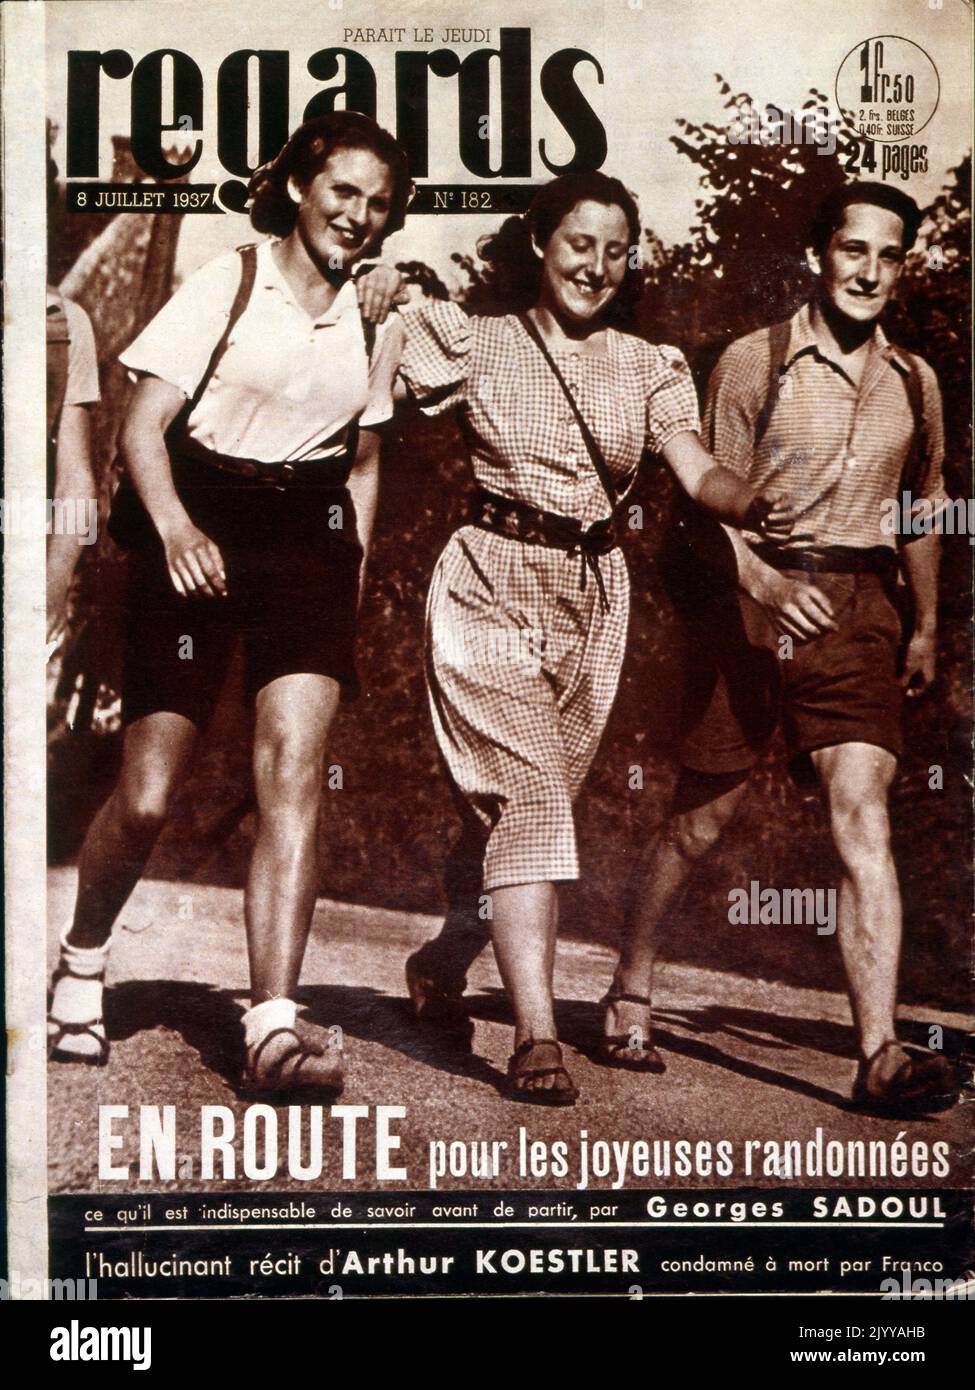 Front cover of the magazine called 'Regards' dated 8 July 1937 showing girls and a boy dressed for a walk. Stock Photo